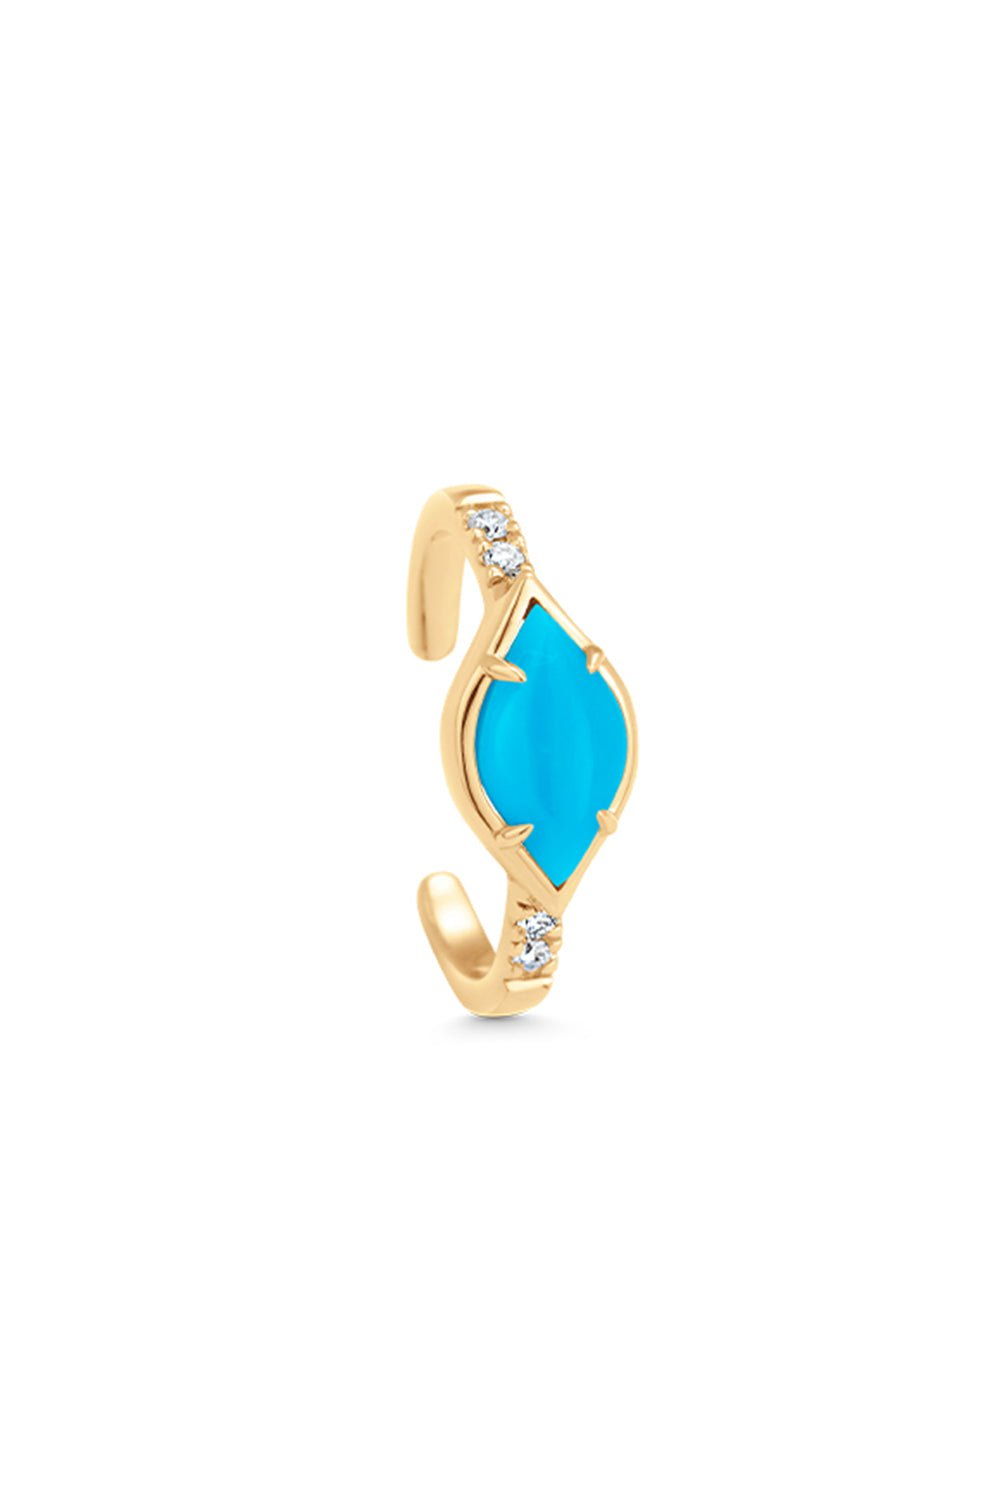 SARA WEINSTOCK-Donna Turquoise Ear Cuff-YELLOW GOLD